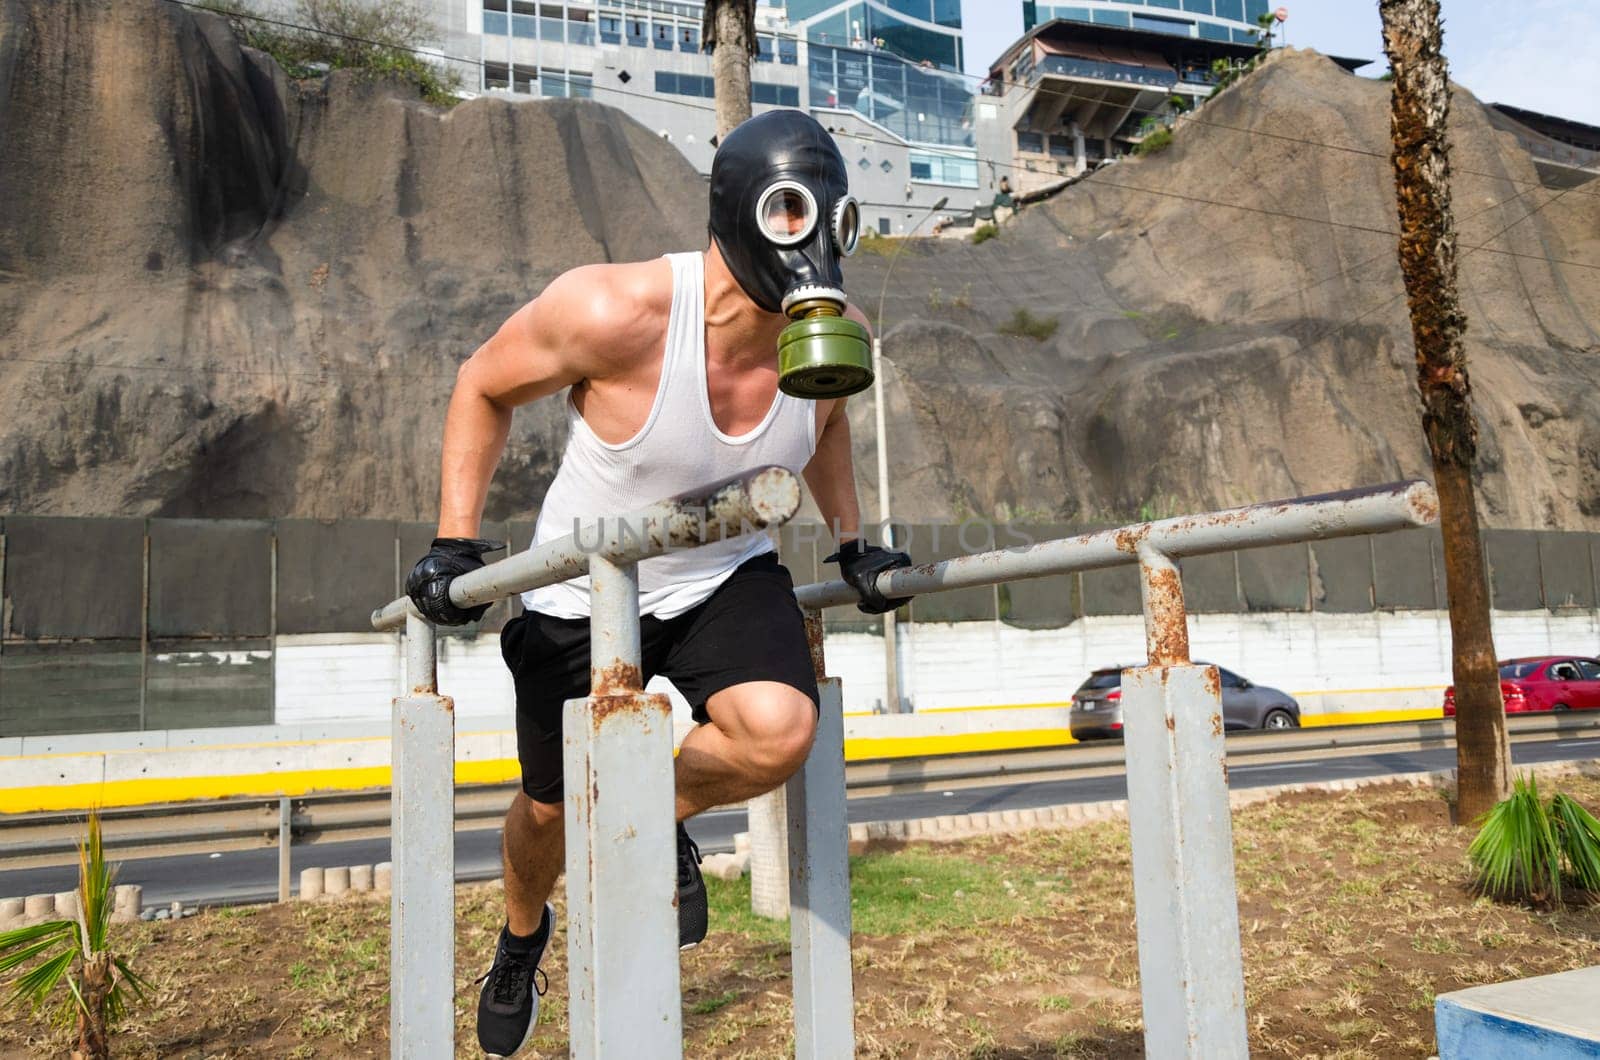 athletic man in a protective mask at practice in the morning. by Peruphotoart